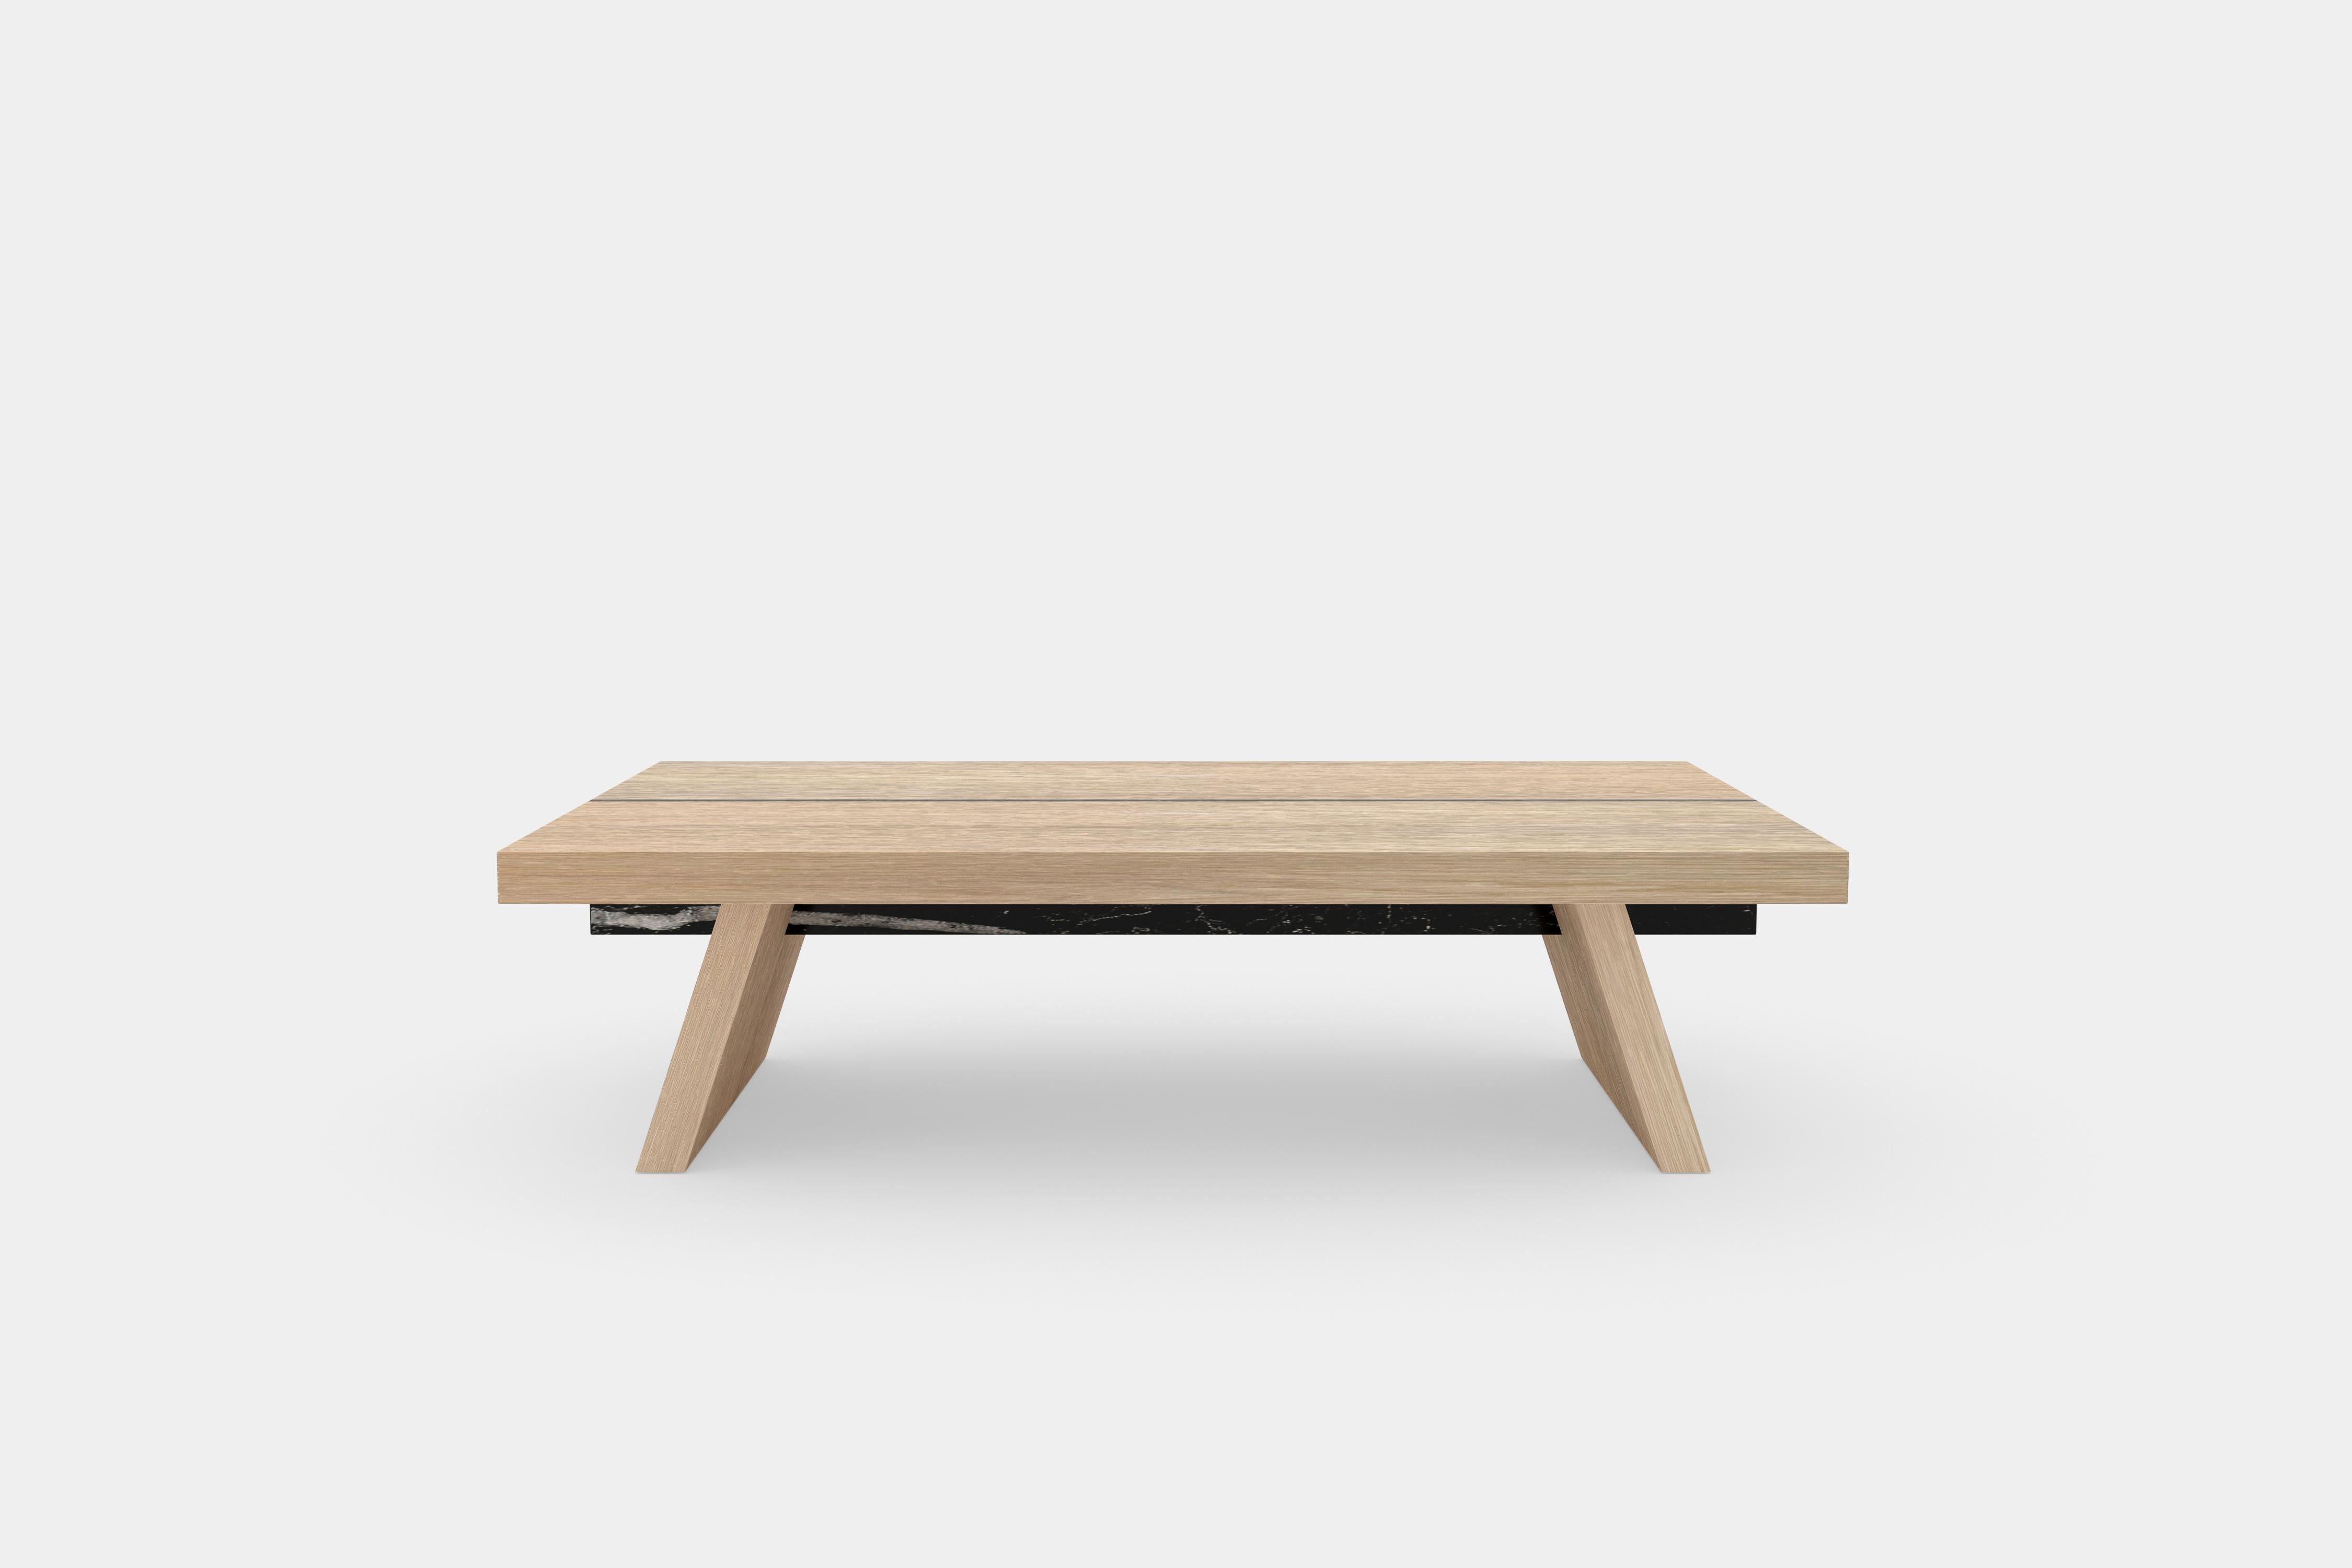 Contemporary Laws of Motion Rectangular Coffee Table in Oak Solid Wood and Marble by NONO